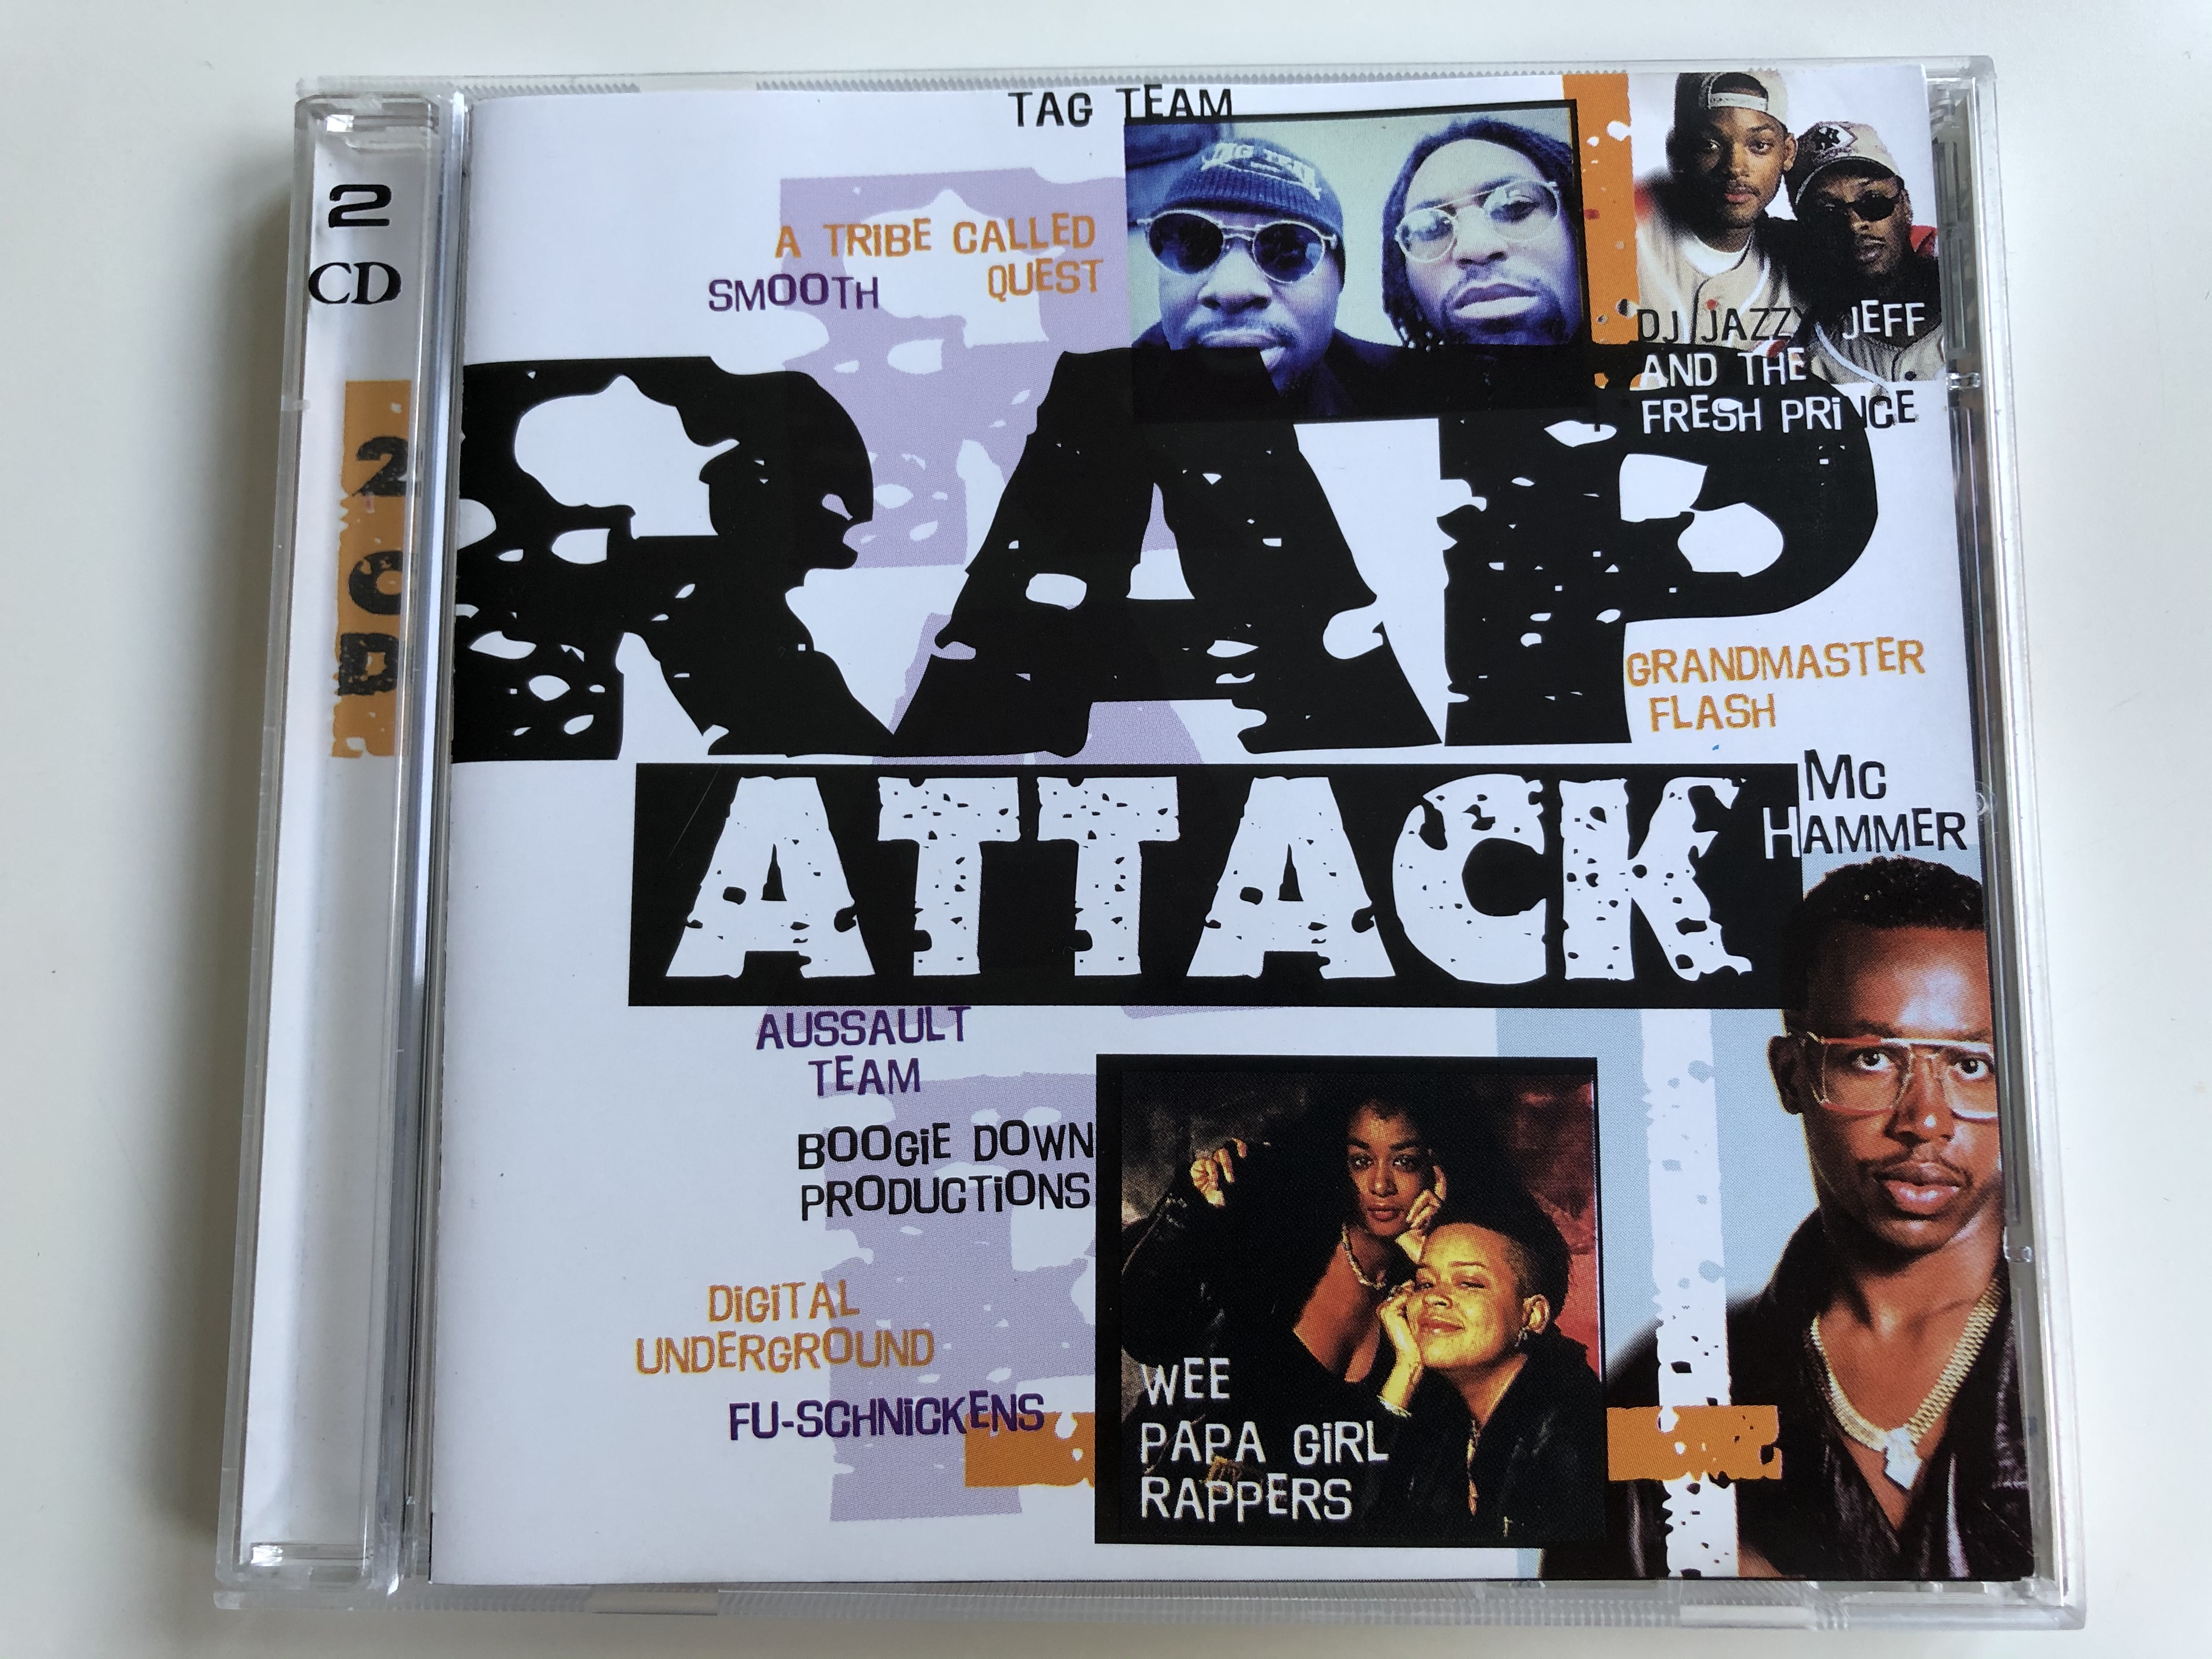 rap-attack-tag-team-a-tribe-called-quest-smooth-grandmaster-flash-assault-team-boogie-down-productions-digital-underground-fu-schnickens-wee-papa-girl-rappers-disky-2x-audio-cd-1997-dou-1-.jpg